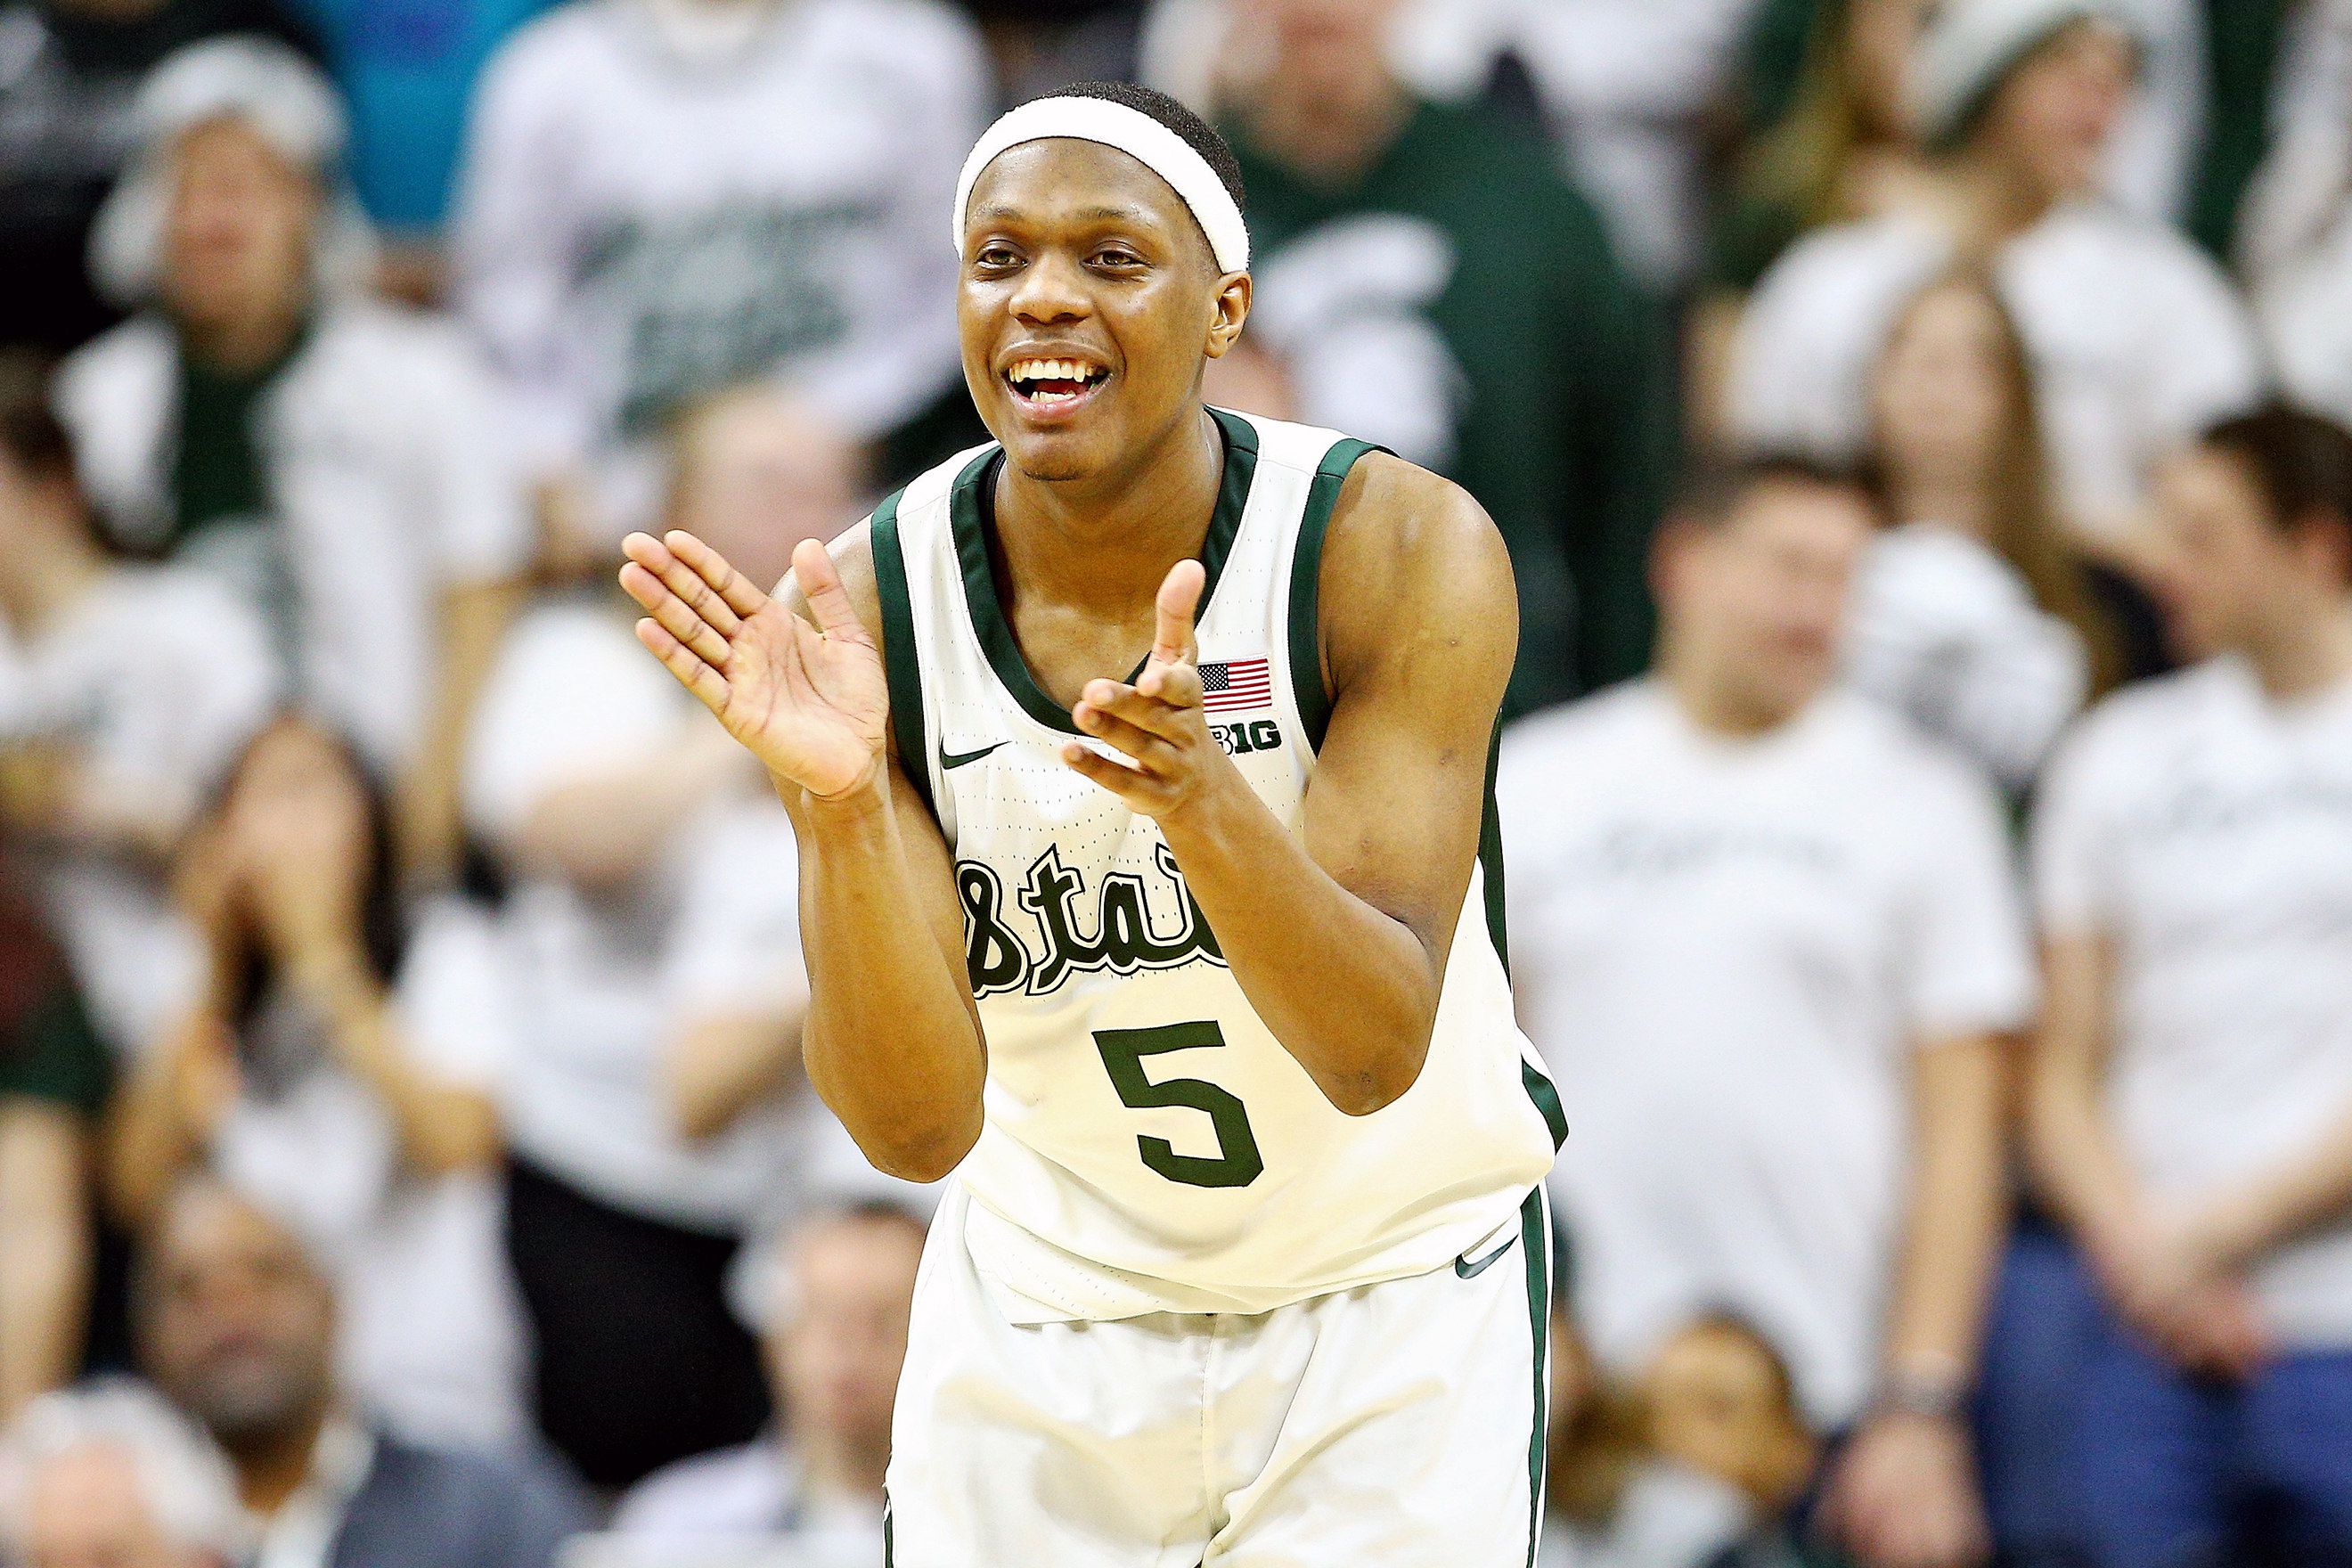 Michigan State Basketball Schedule 2022 23 See Michigan State's Full 2019-20 Basketball Schedule - Mlive.com